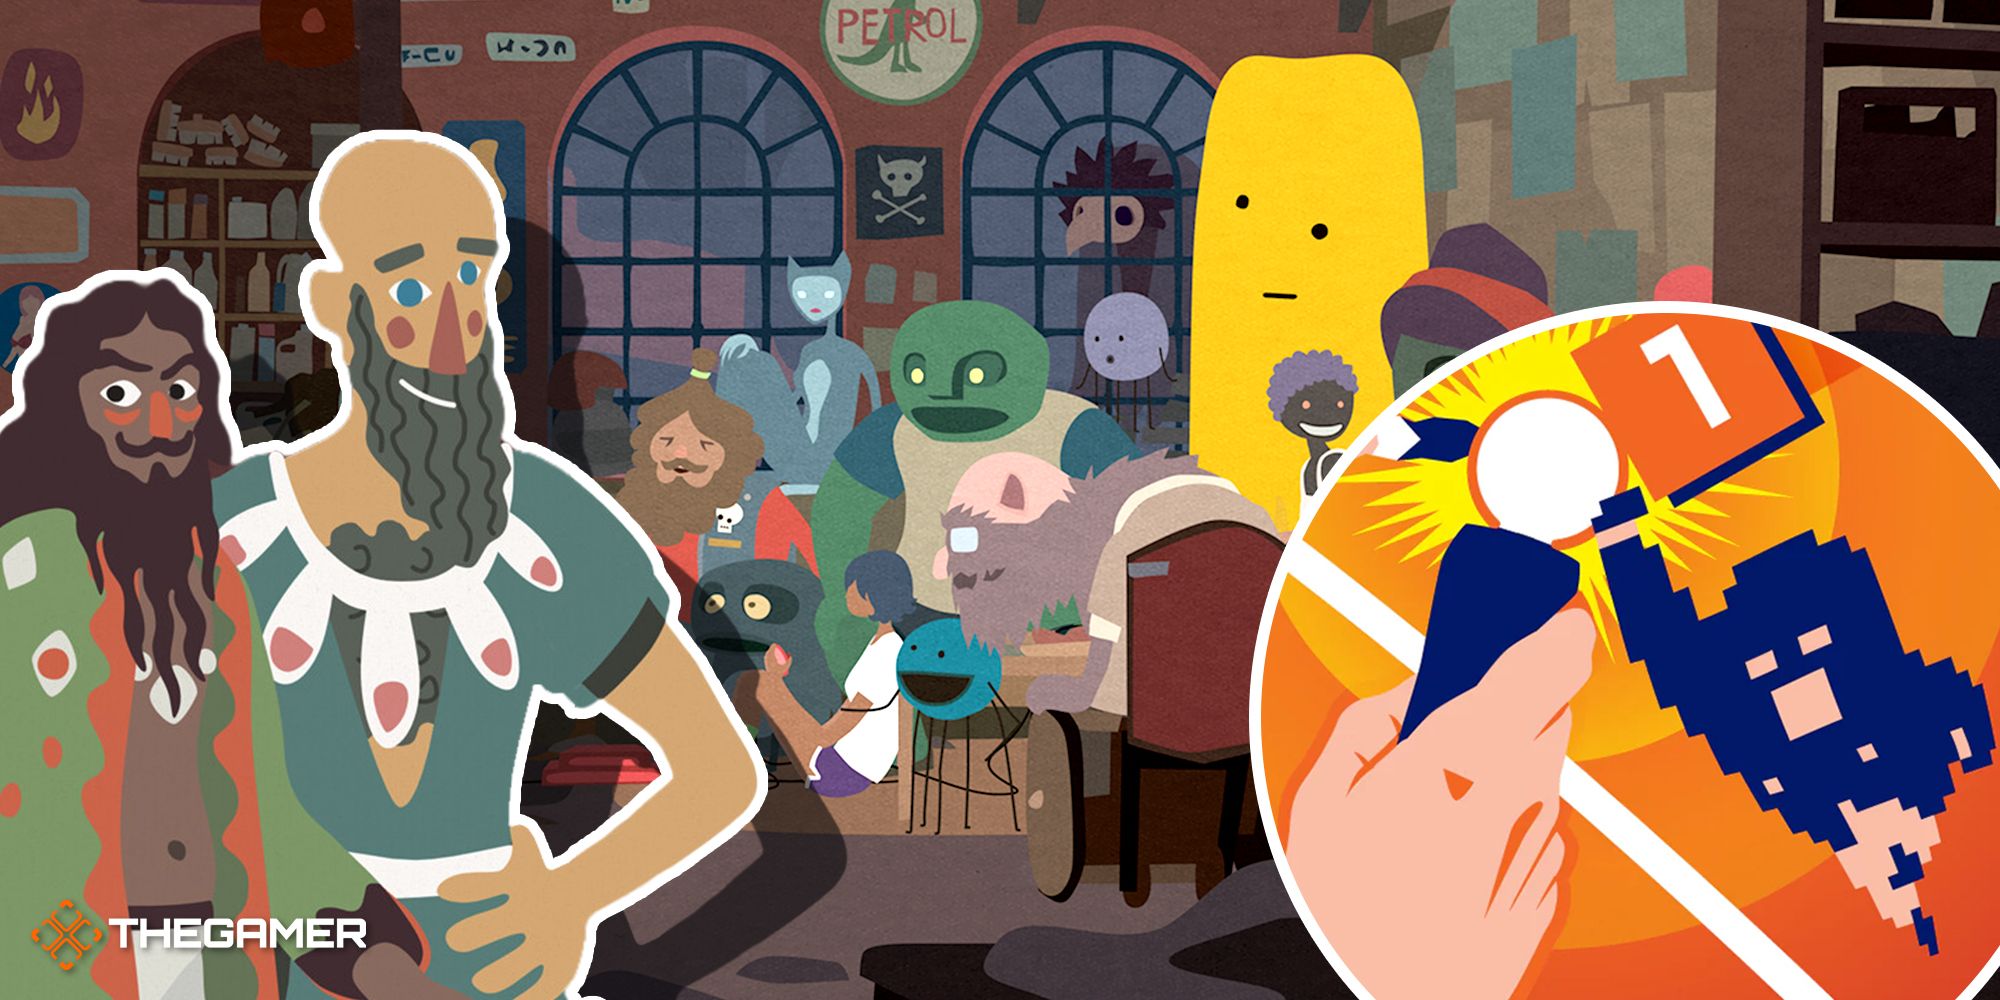 The background is the community in Mutazione, with characters from Saltsea Chronicles on the left and the key art from Sportfriends on the right